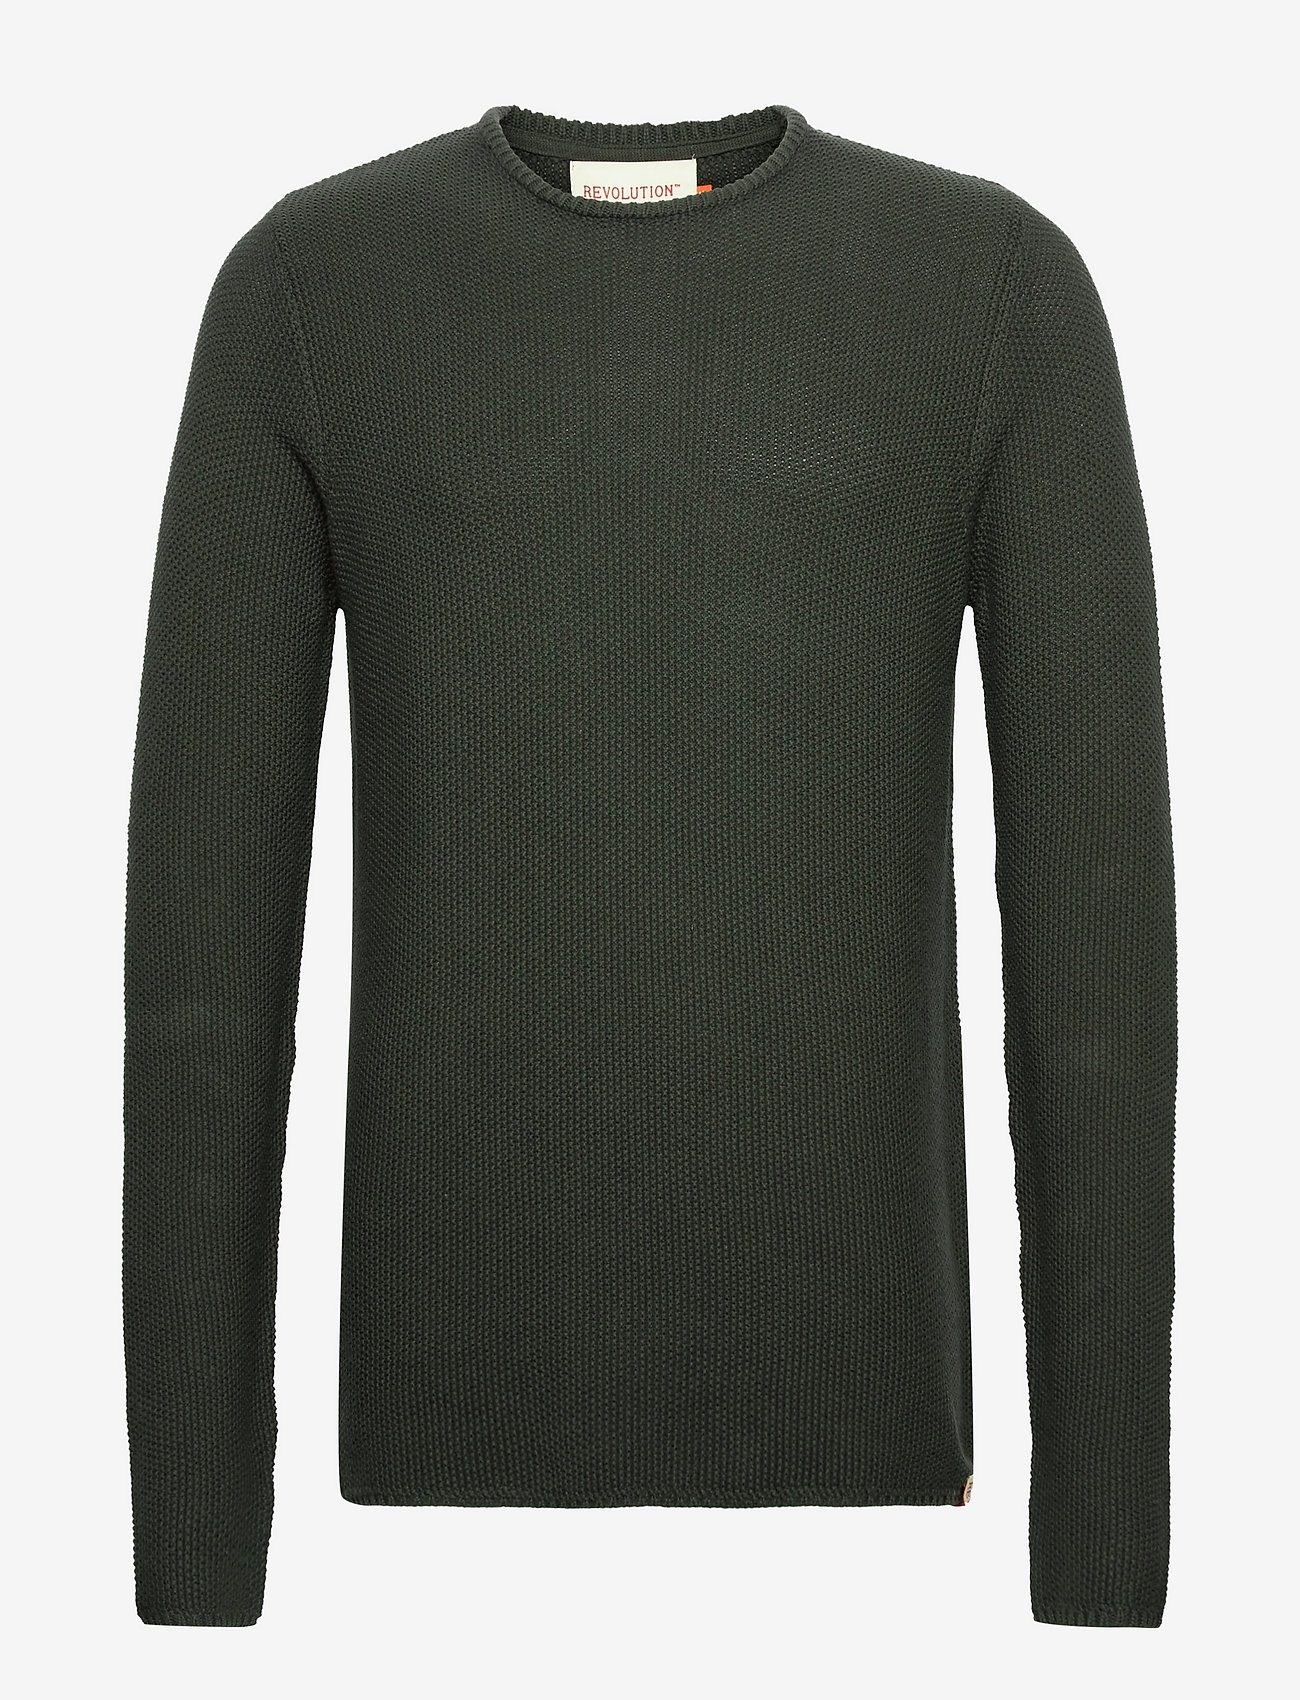 Revolution - Sweater in pearl knit structure - knitted round necks - army - 0